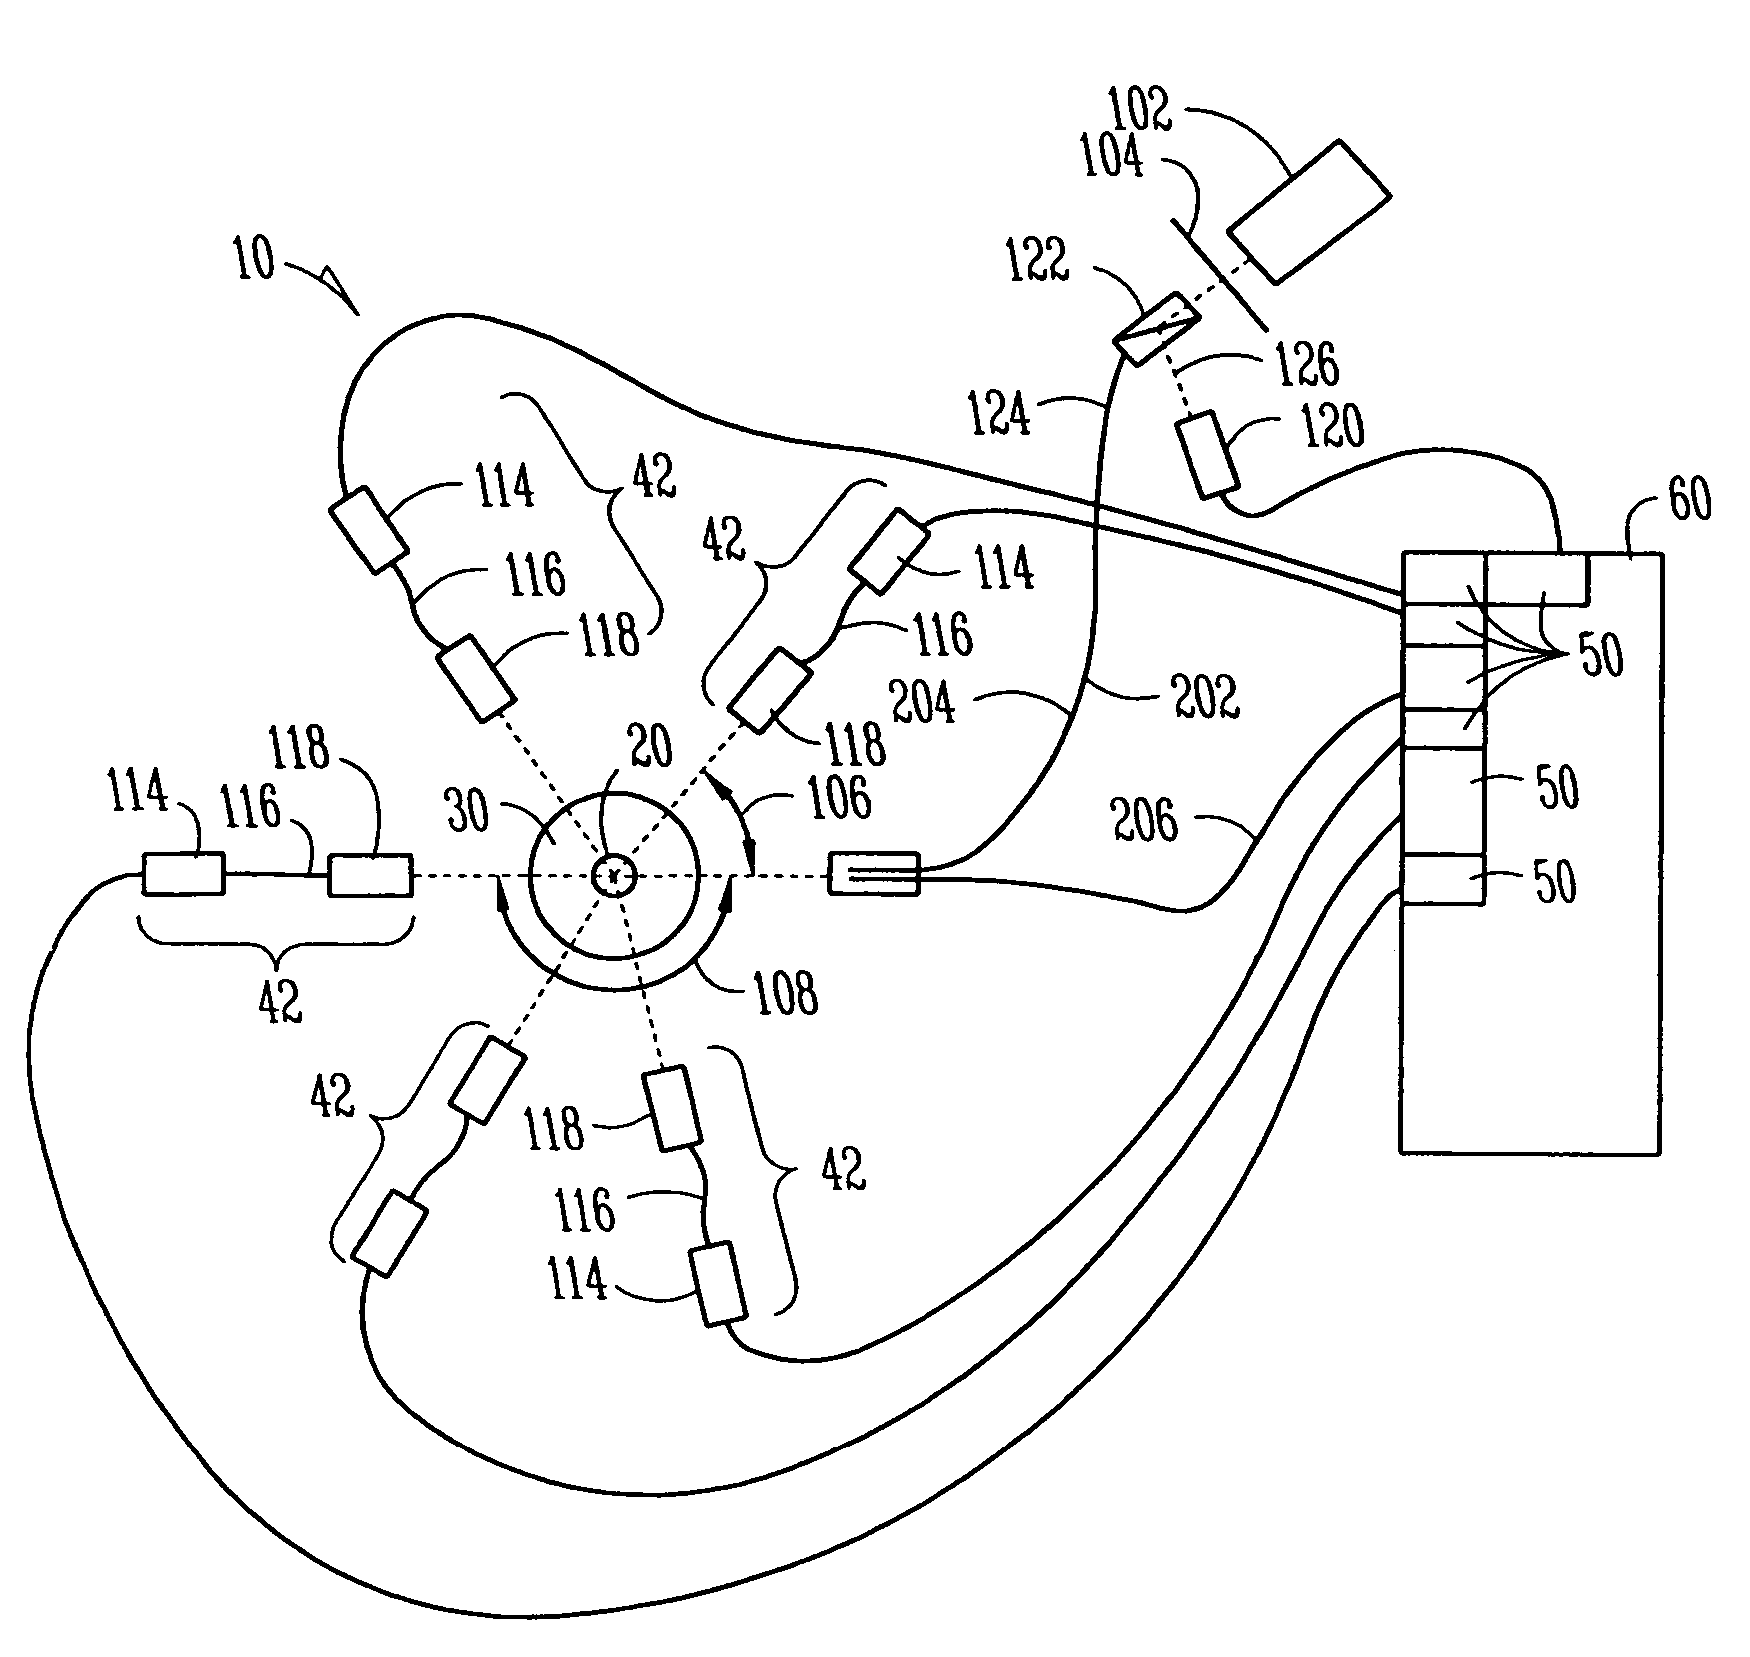 Optical method and system to determine distribution of lipid particles in a sample